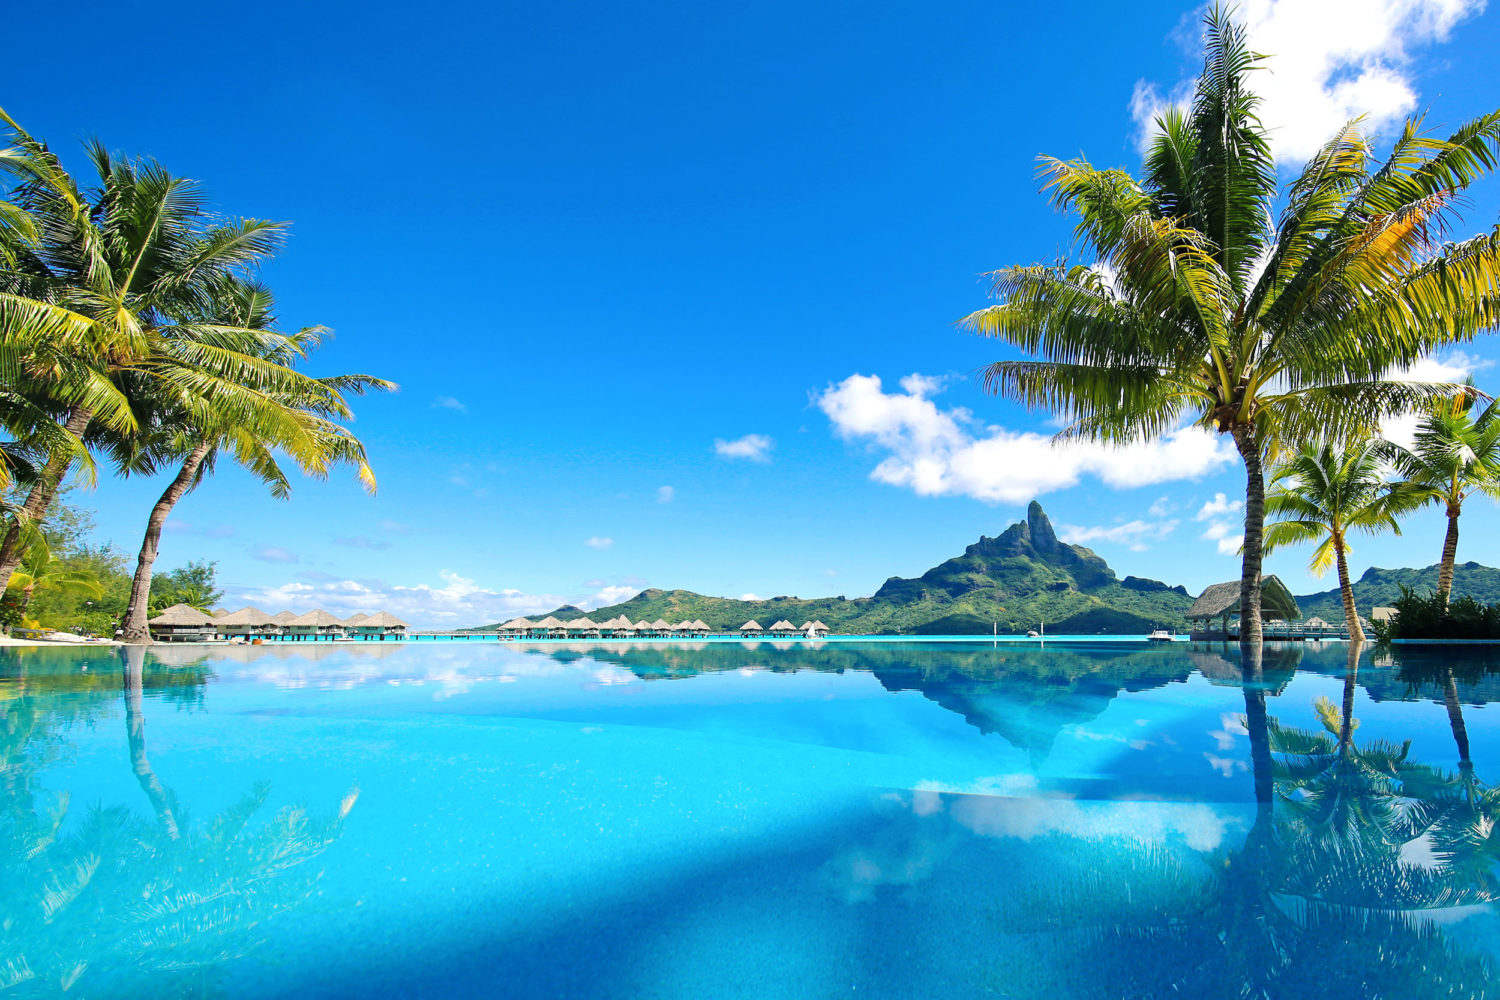 An infinity pool with palm trees on either side overlooking the sea, Over-water bungalows and a mountain in the distance